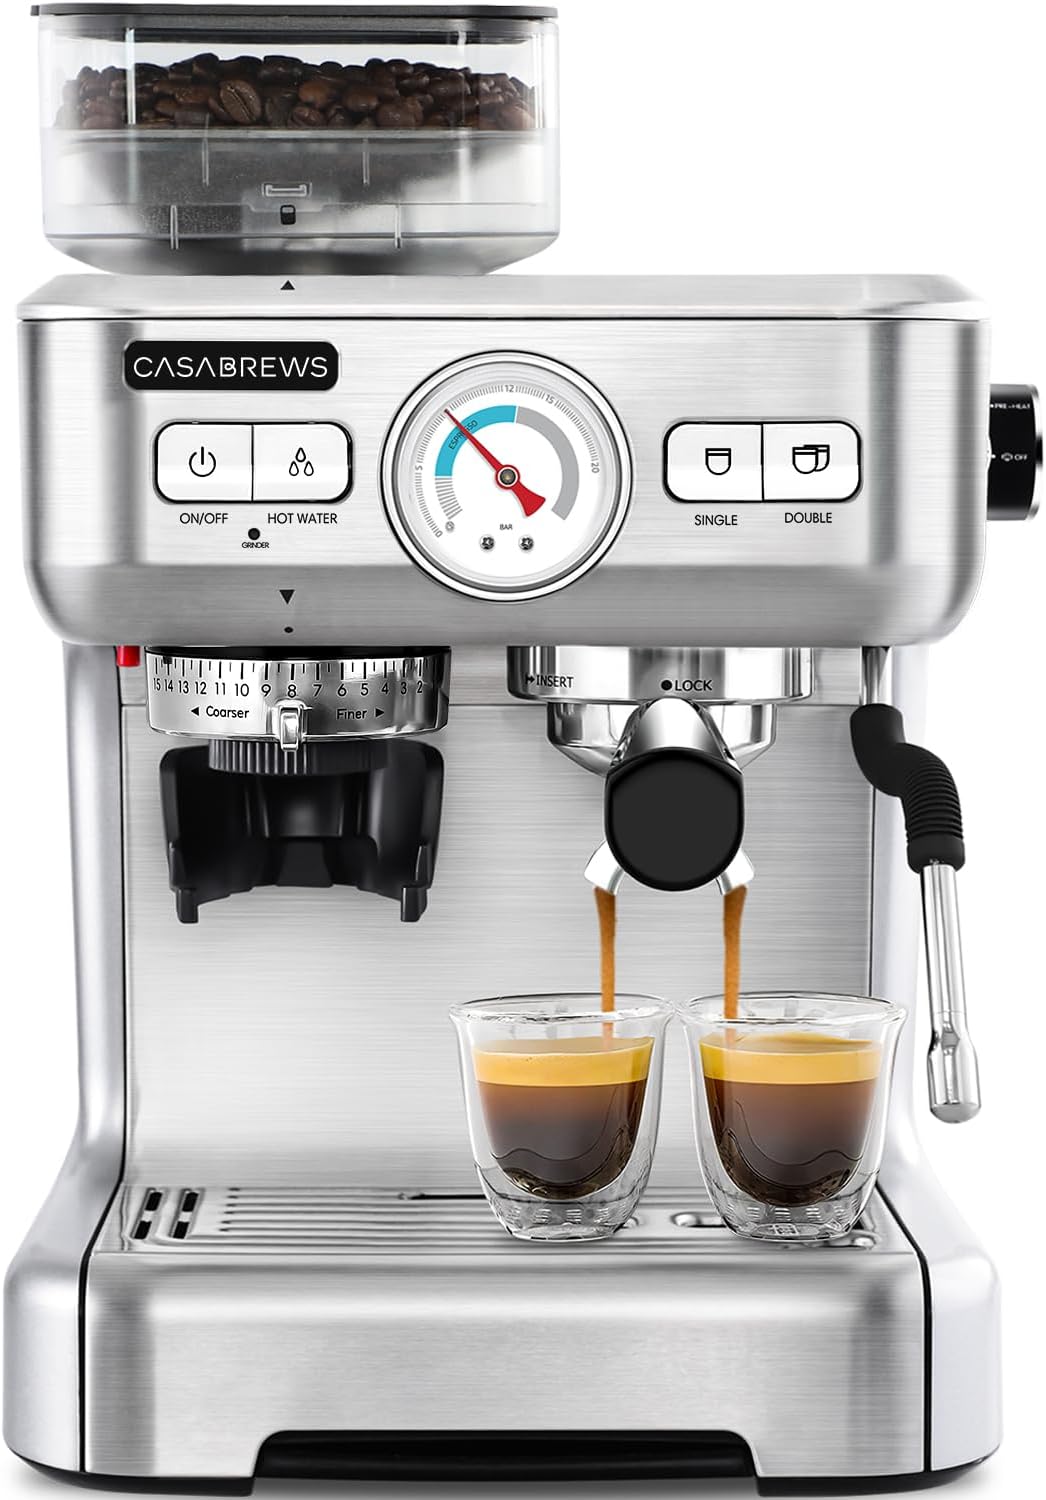 CASABREWS Espresso Machine with Grinder, 20 Bar Semi Automatic Espresso Coffee Maker with Milk Frother for Home Barista, Professional Coffee Machine for Cappuccinos or Lattes, Gift for Mom Dad